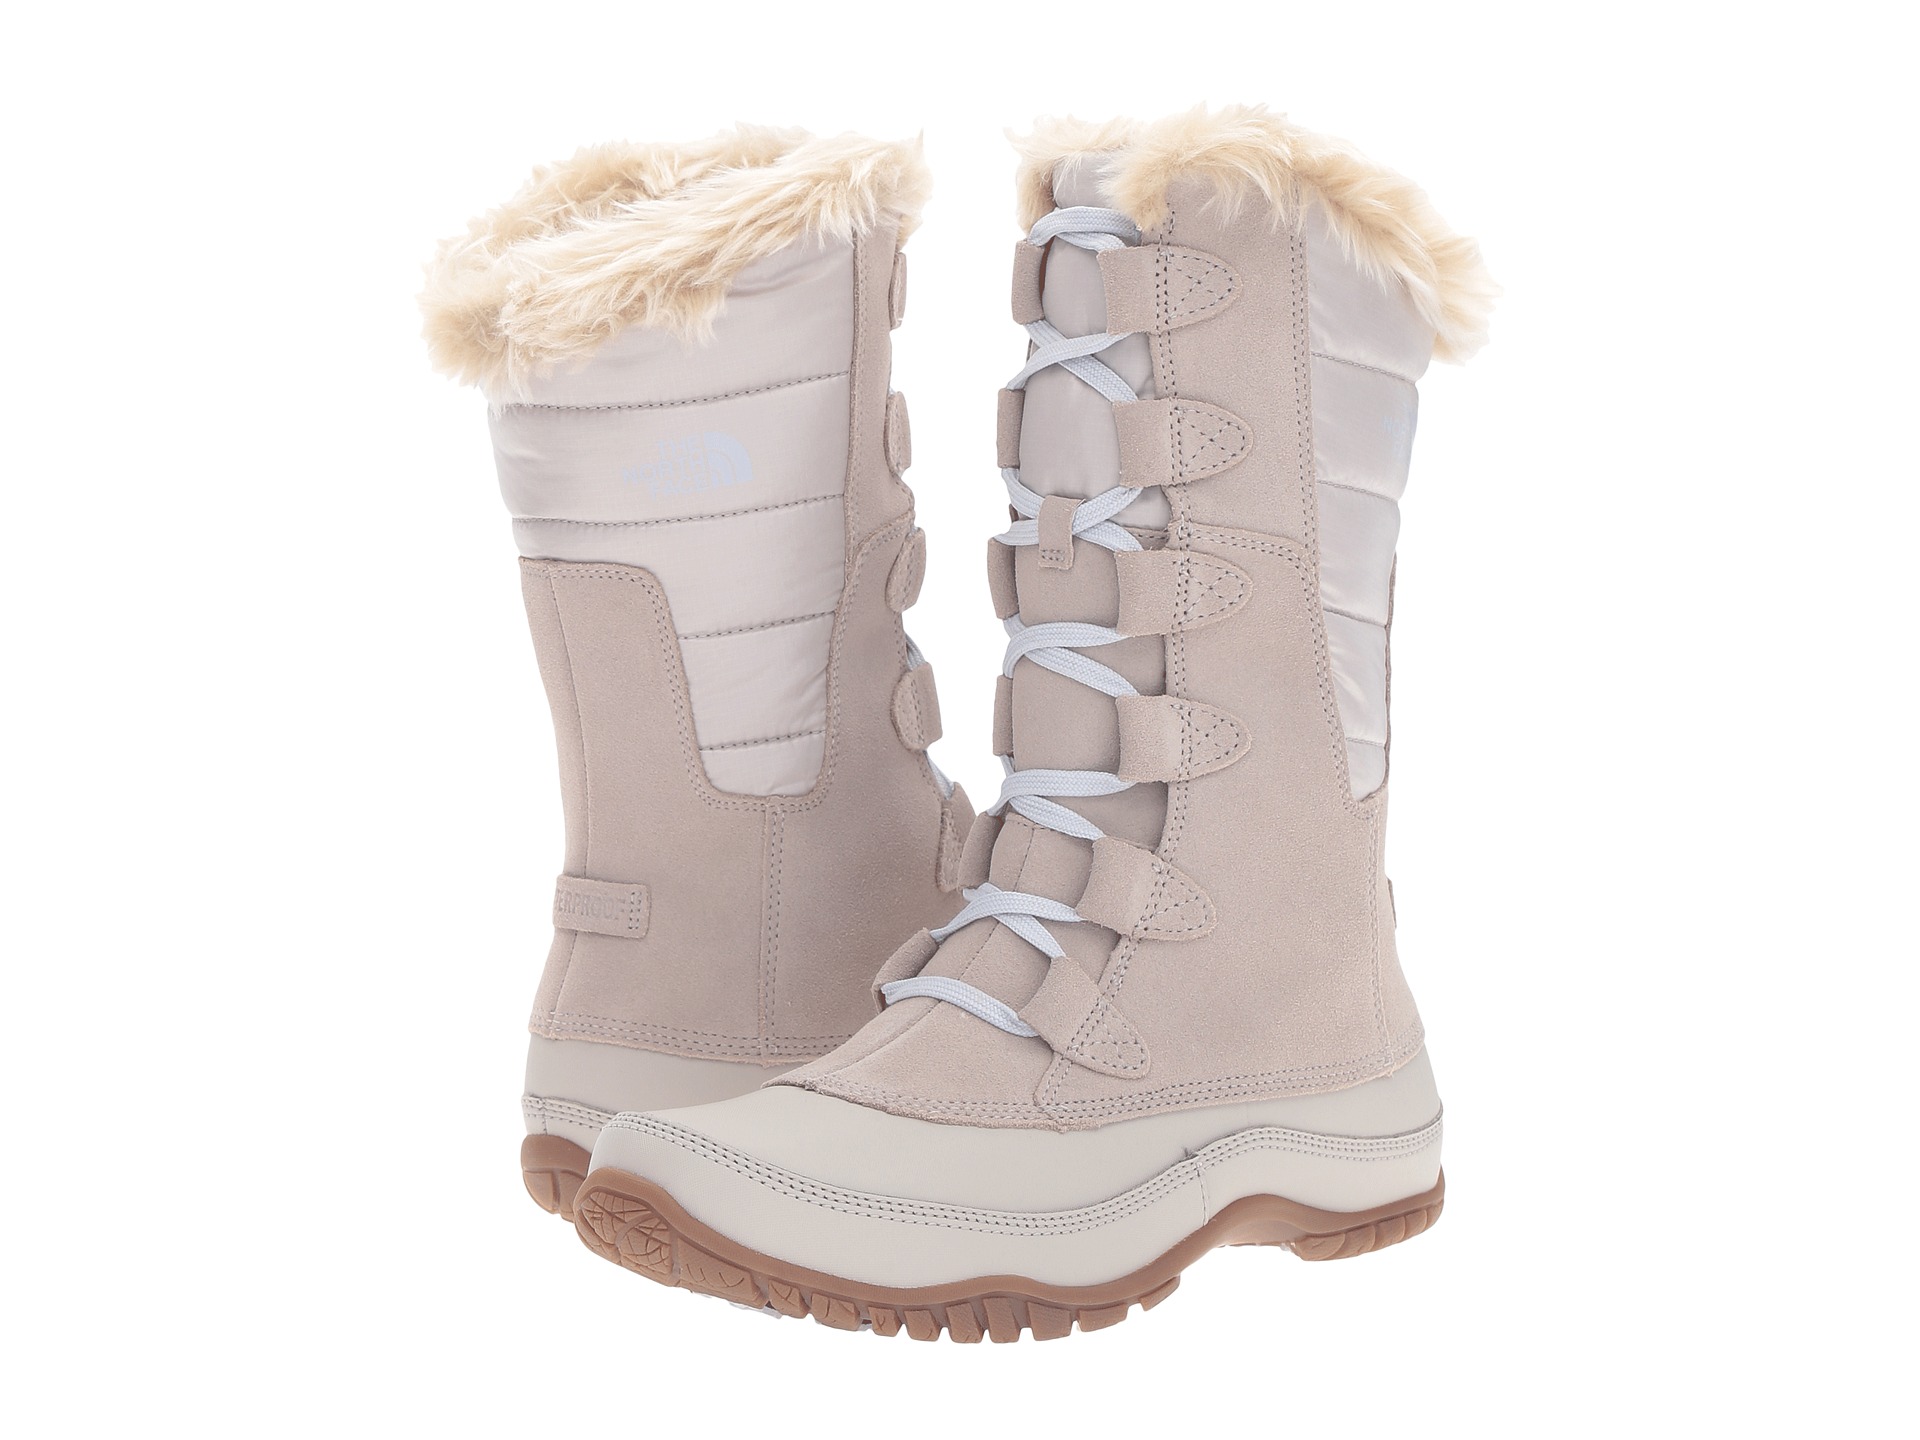 north face ladies winter boots